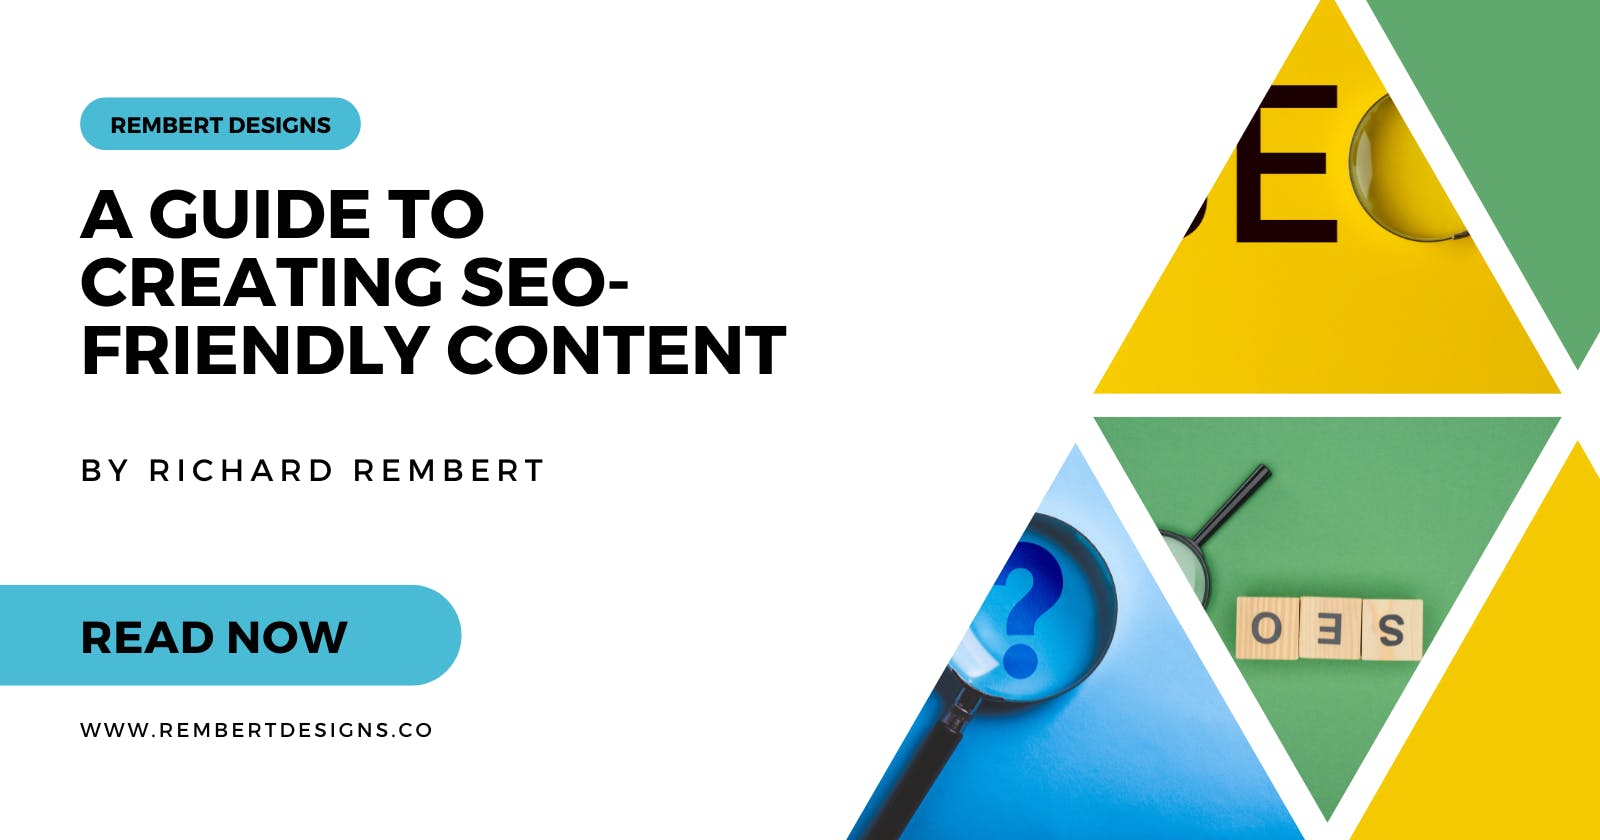 A Guide to Creating SEO-Friendly Content